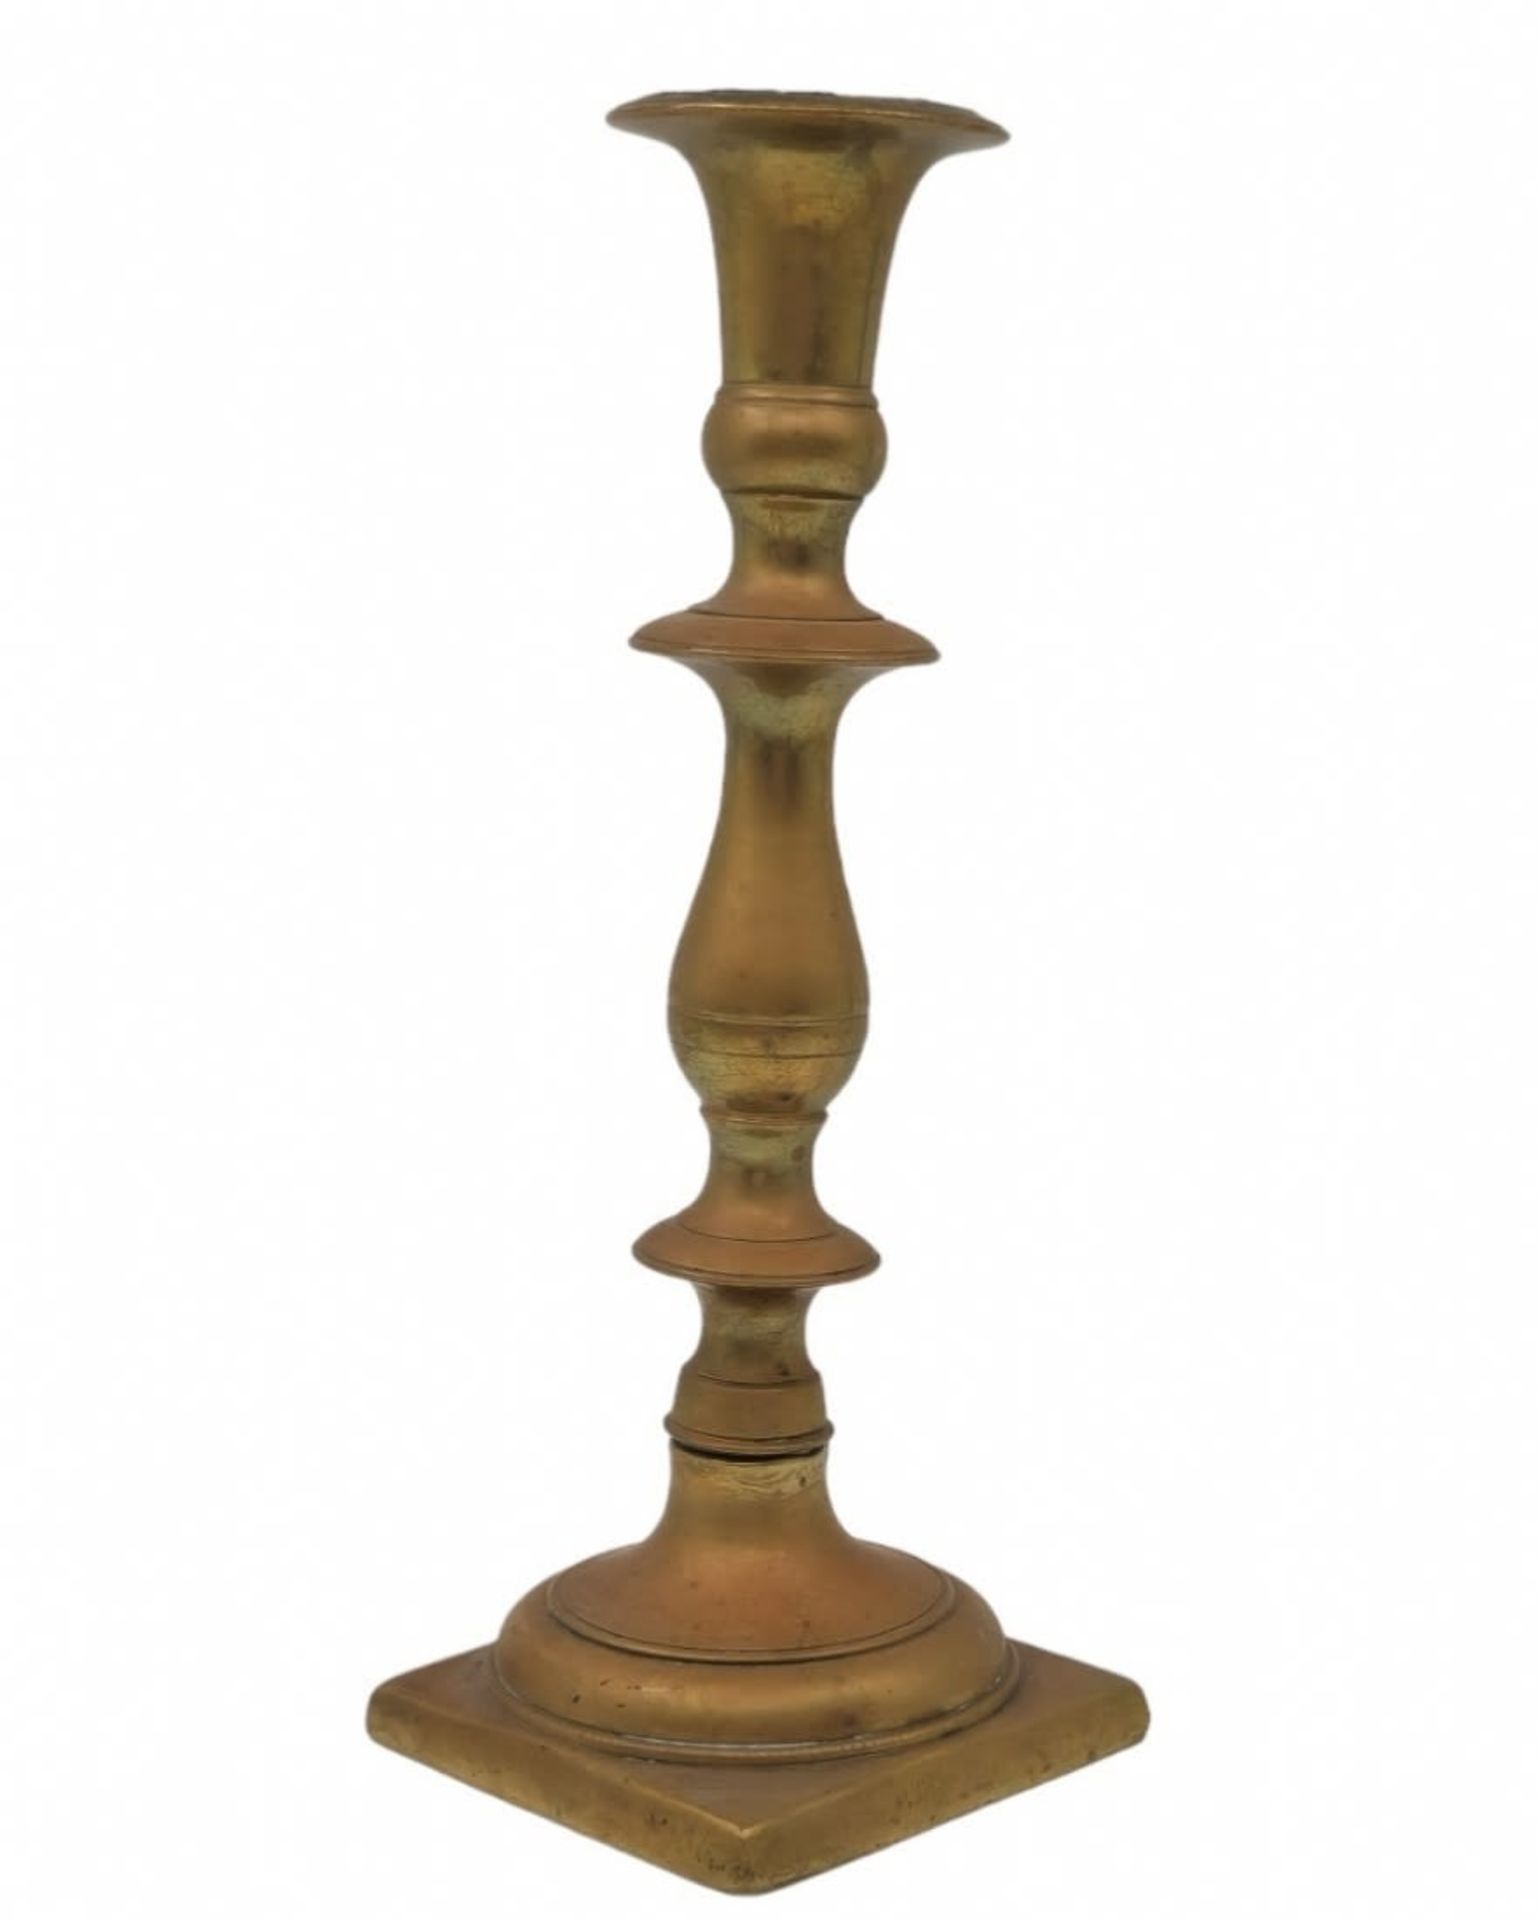 An antique Jewish candlestick from the 18th century, made of bronze (two parts), converted in the - Image 2 of 2